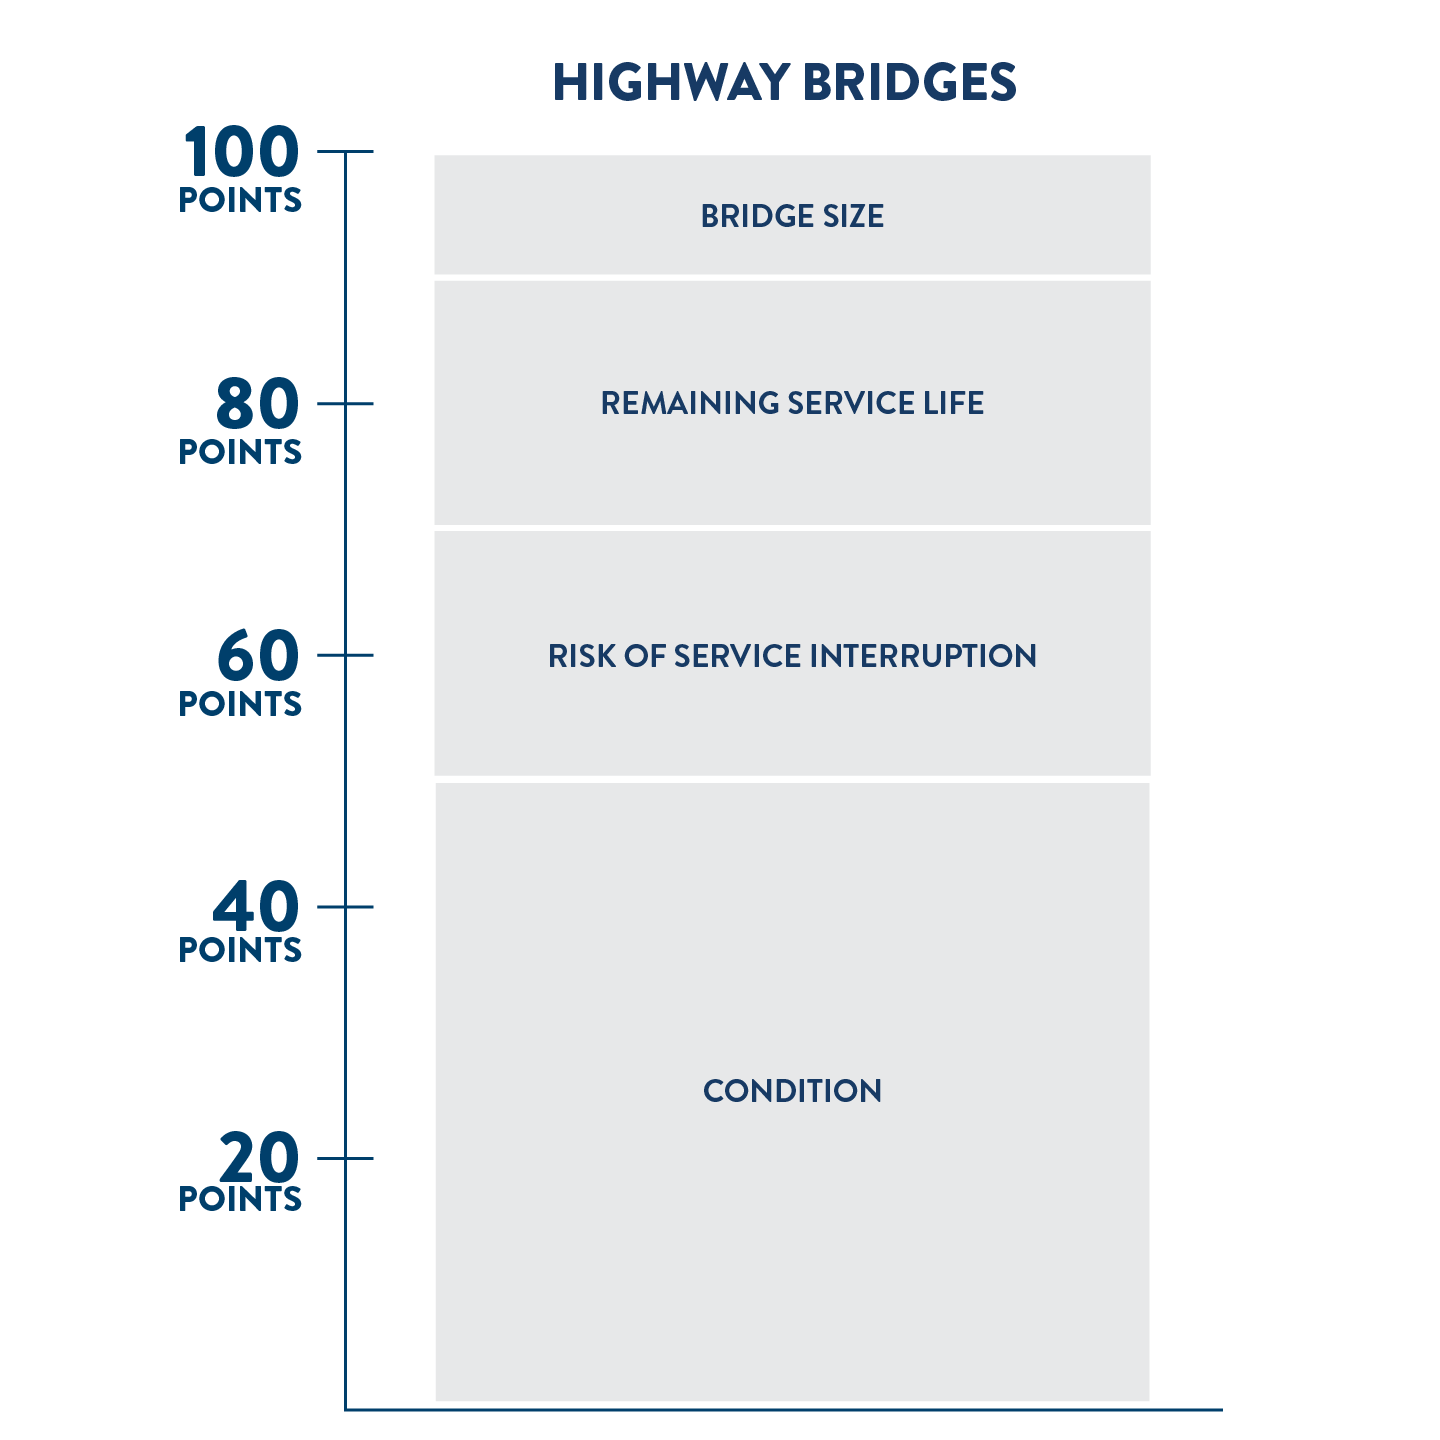 Scoring criteria for national highway system bridge projects. Out of 100 possible points, 50 points are based on the condition of the bridge, 20 points are based on the risk of service interruption, 20 points are based on the remaining service life of the bridge deck, and 10 points are based on the size of the bridge. 